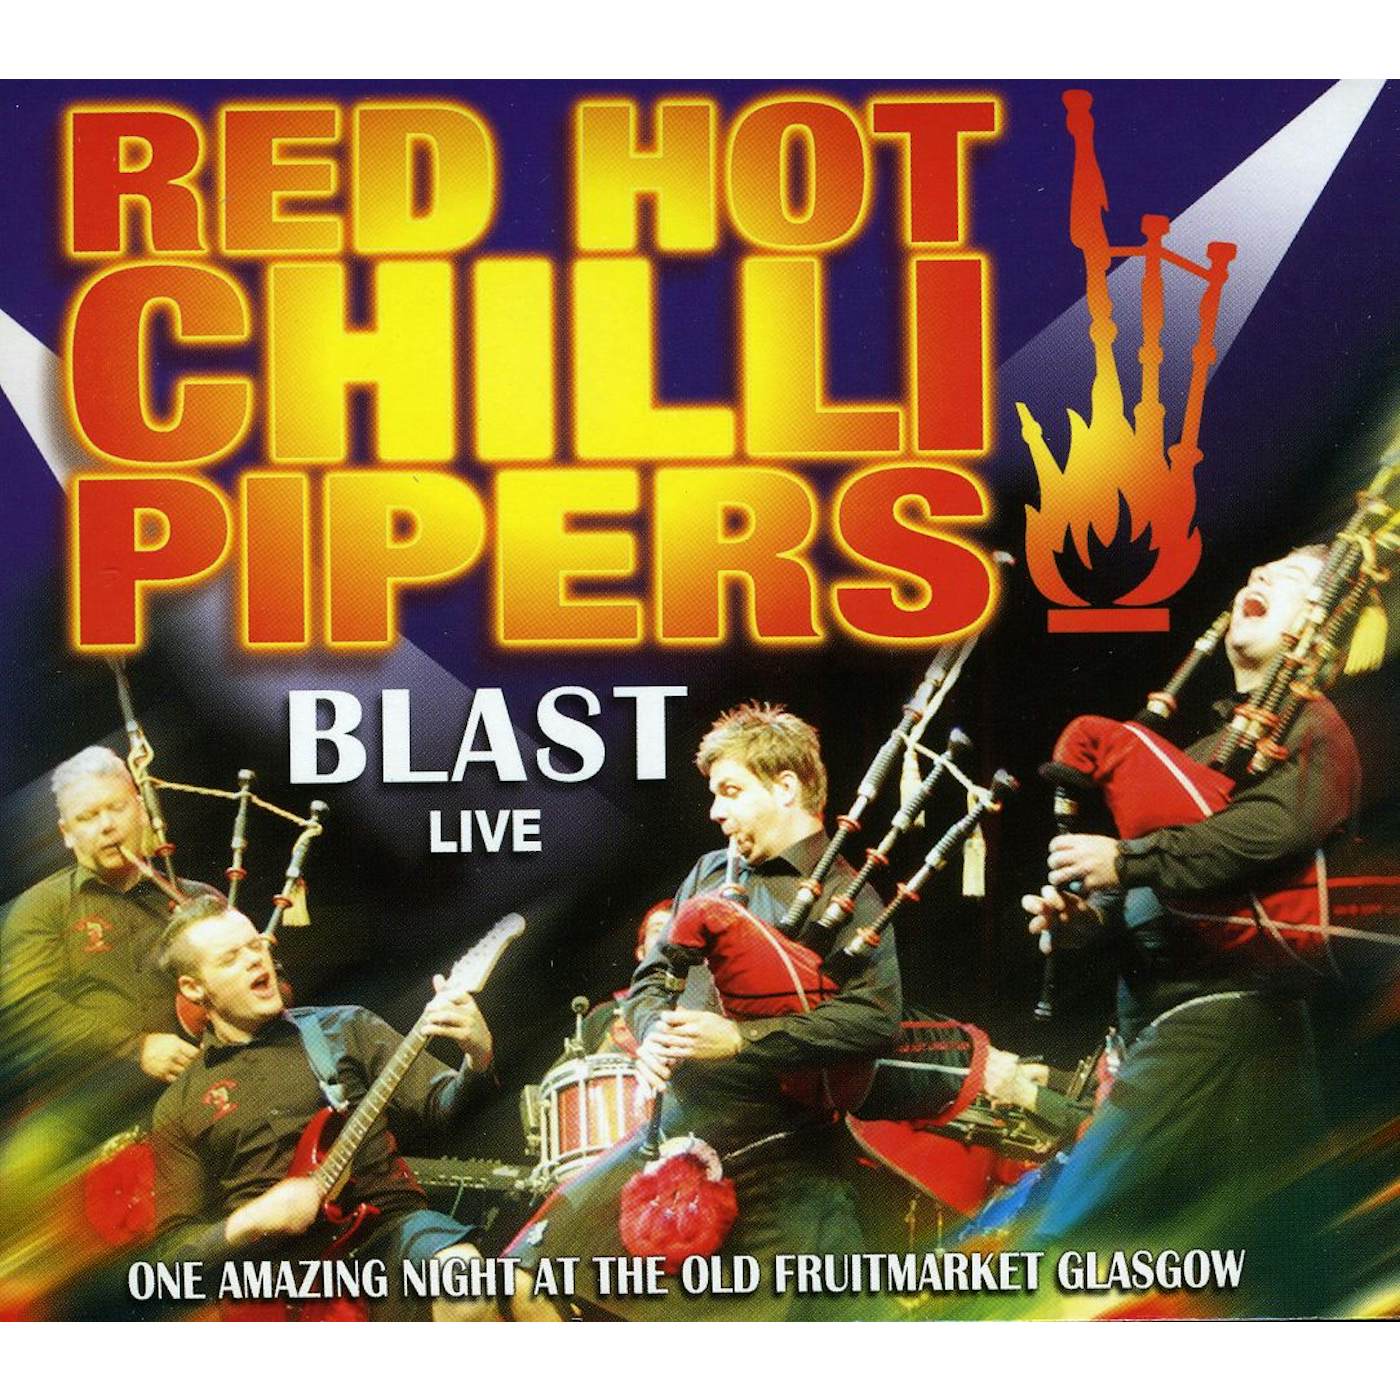 Red Hot Chilli Pipers BLAST: LIVE CD